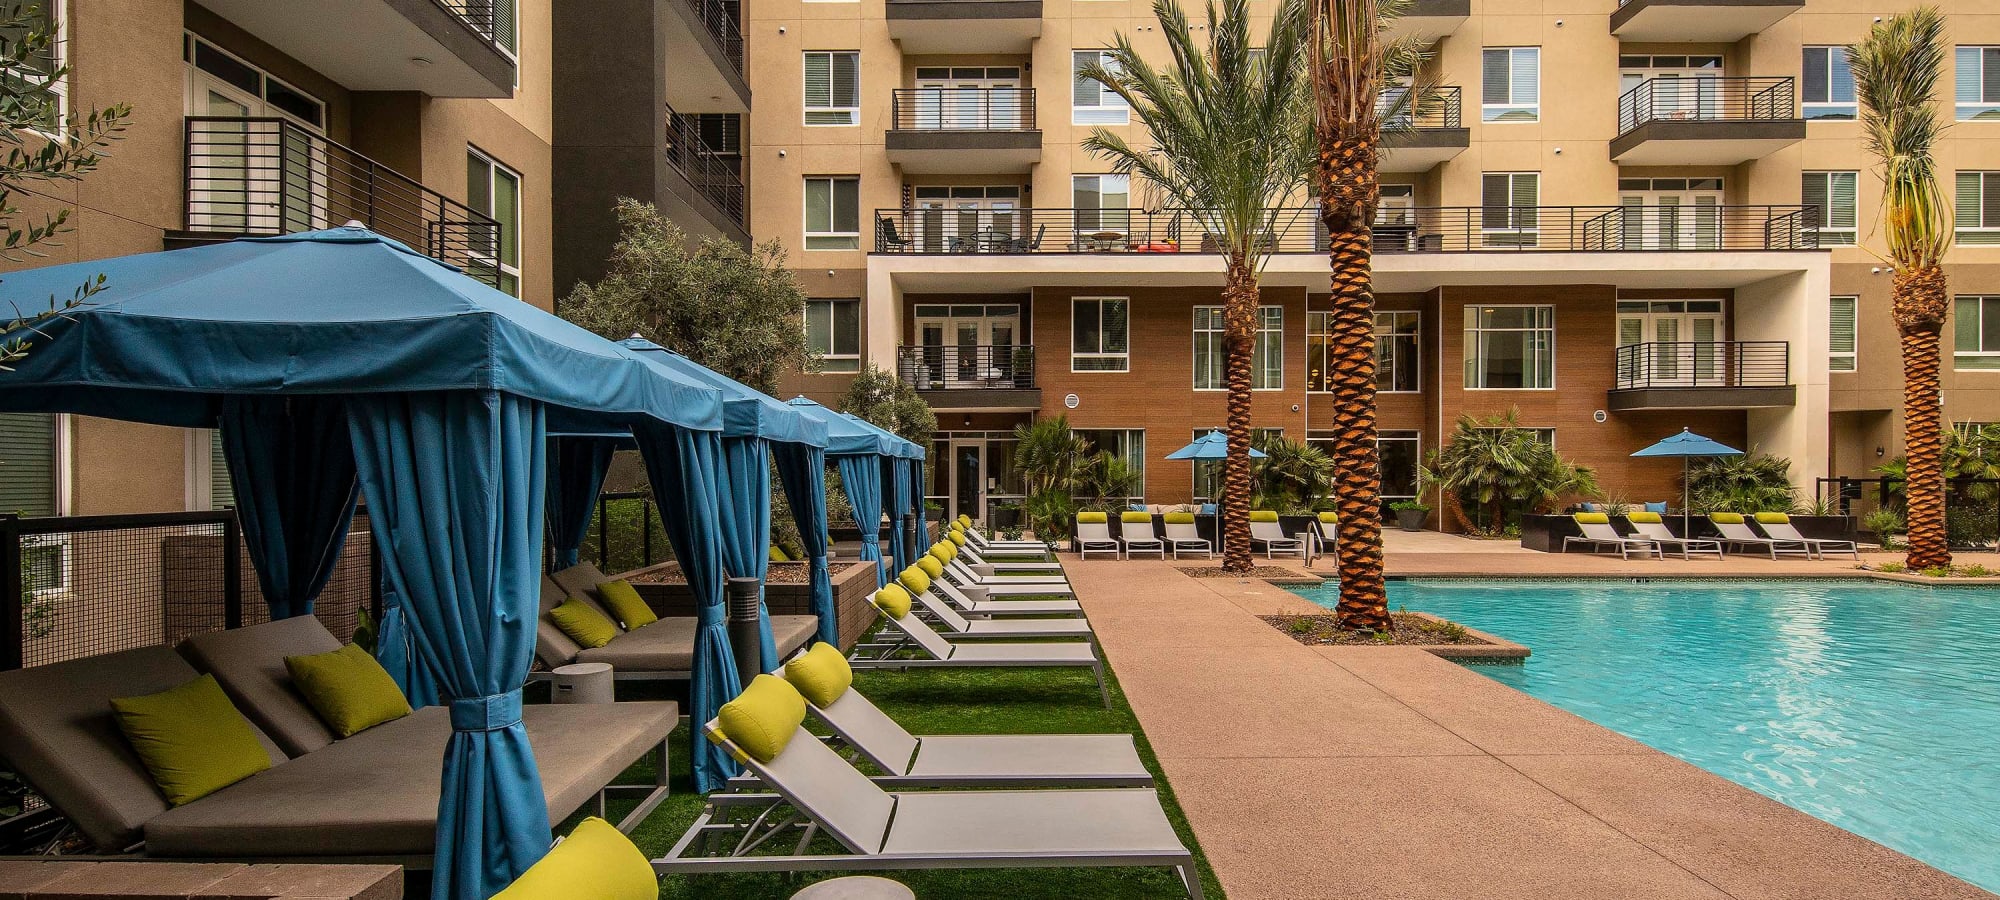 Resort-style pool area with ample chaise lounge chairs and sun deck at Carter in Scottsdale, Arizona